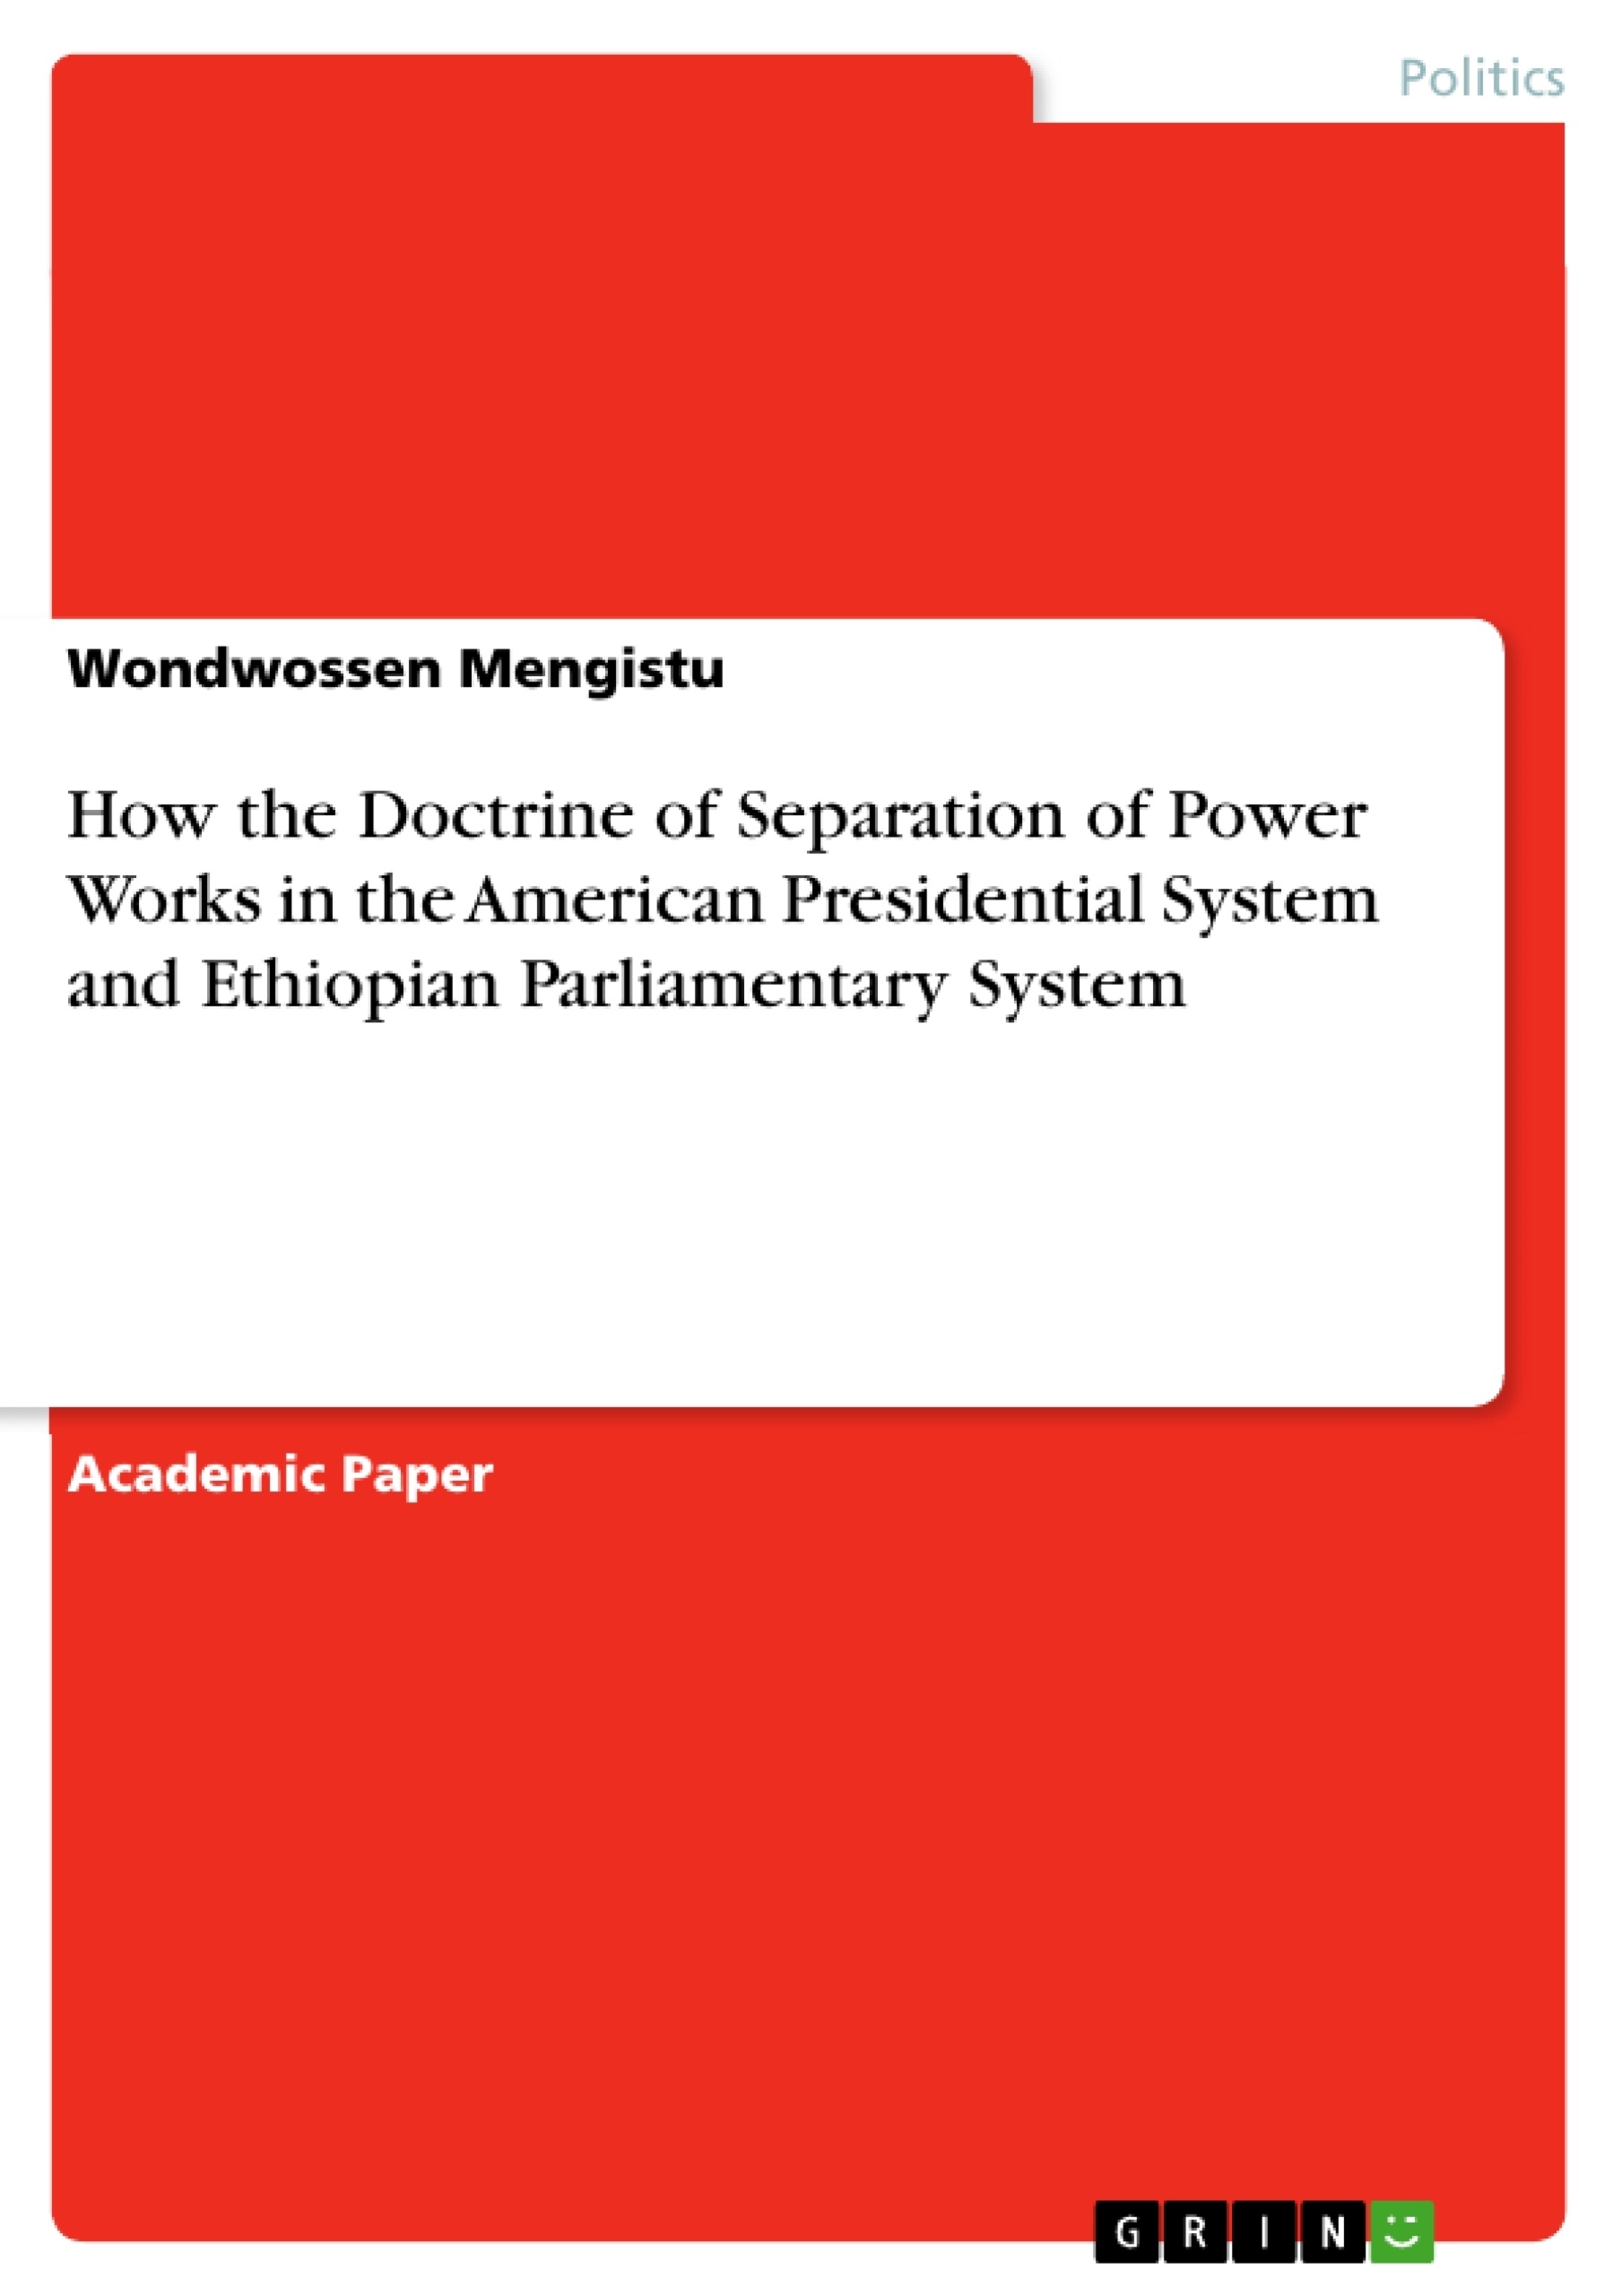 Title: How the Doctrine of Separation of Power Works in the American Presidential System and Ethiopian Parliamentary System